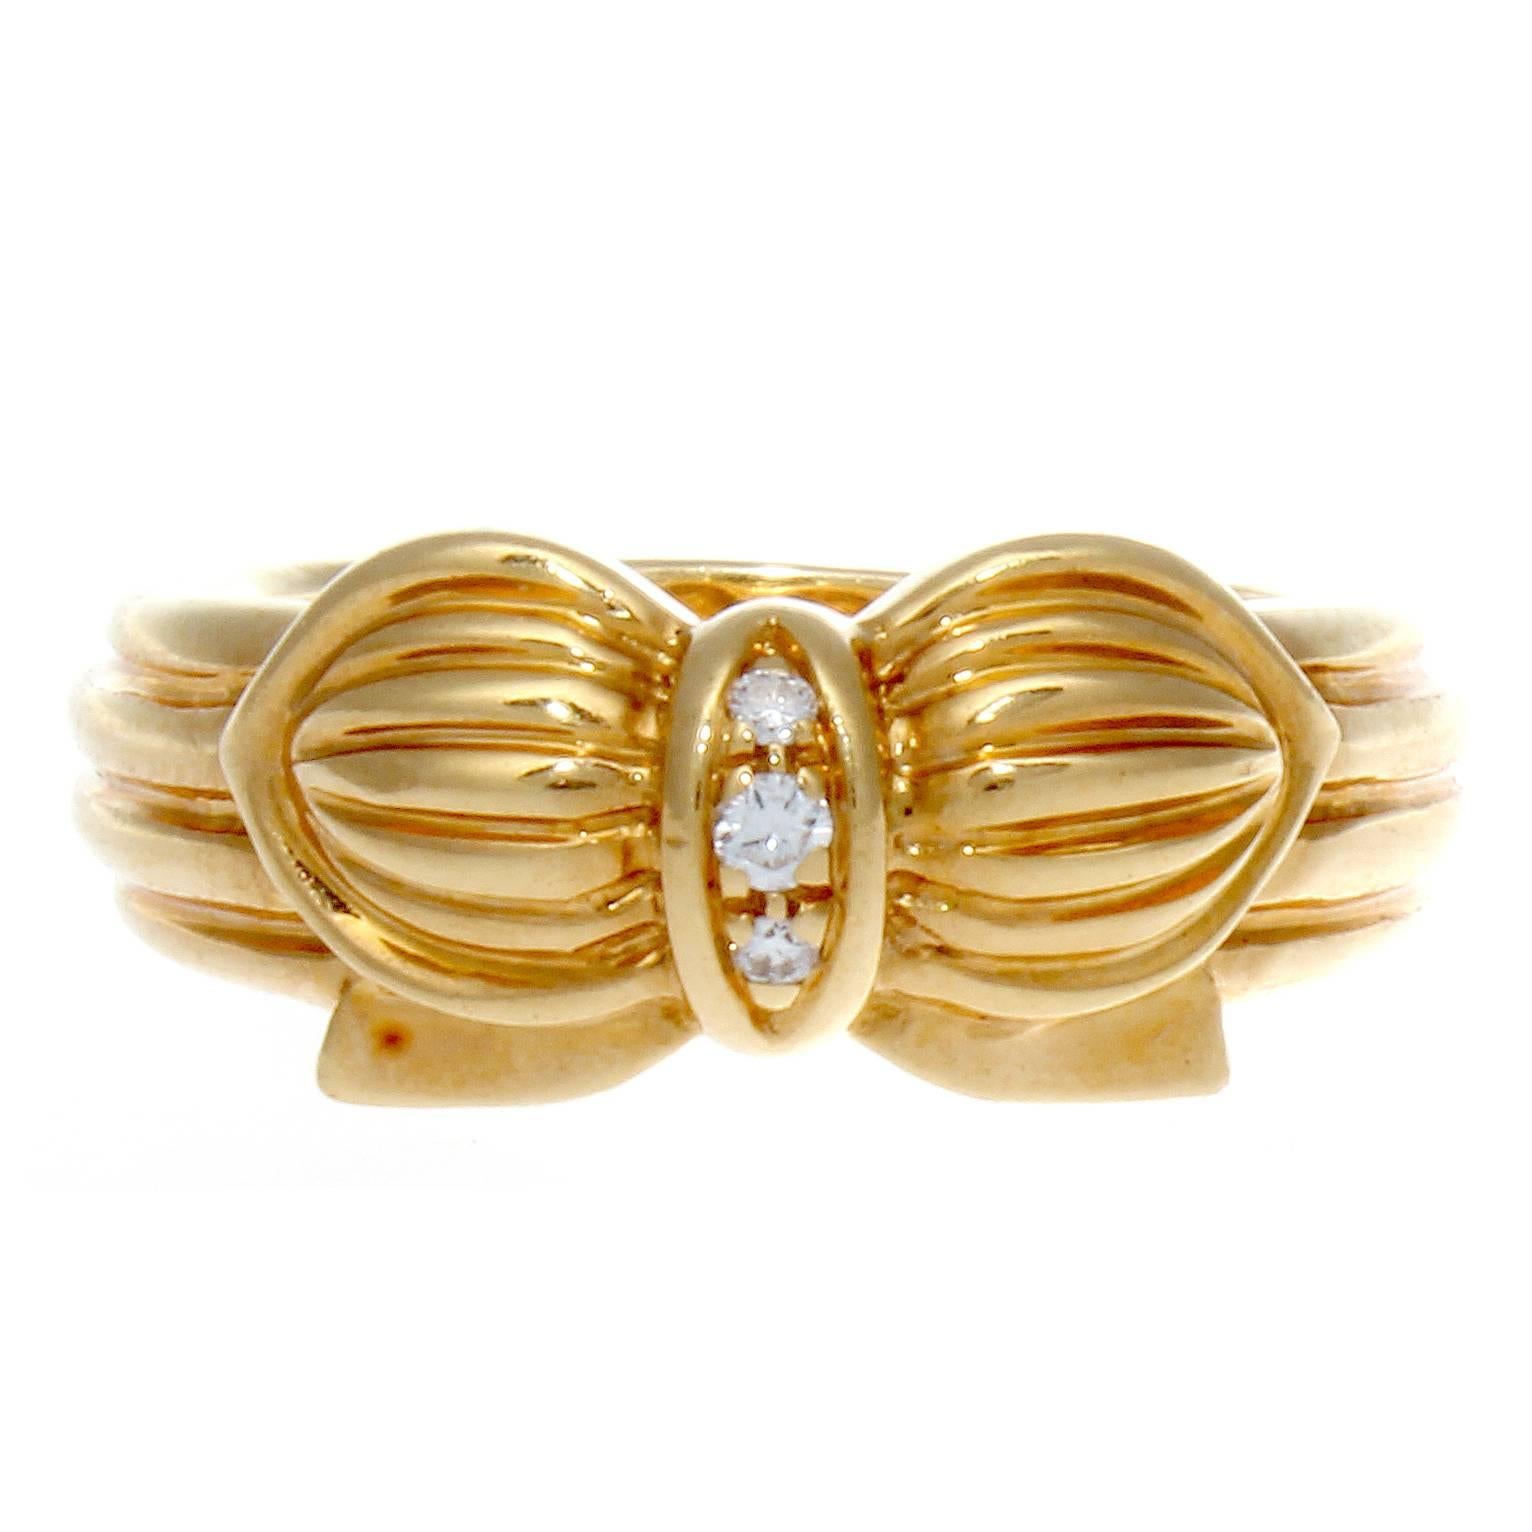 France has always been recognized for its style and fashion and the jewelry created there is no exception. The ring is designed with three near colorless diamonds and fashioned with rolling contours of 18k yellow gold creating this bow motif. Signed